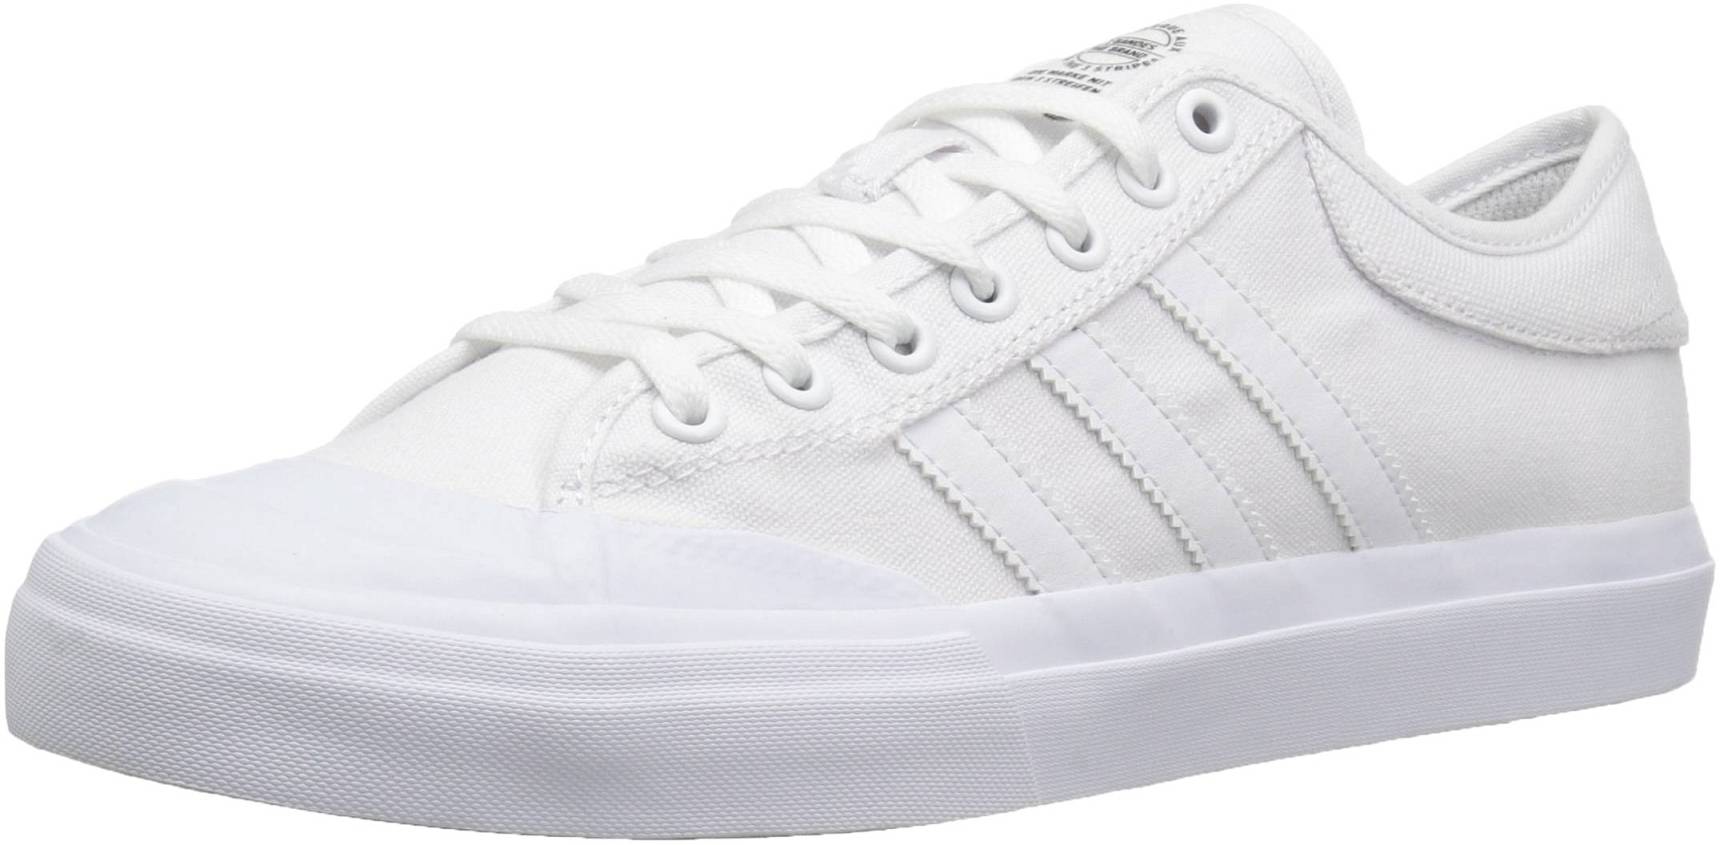 Adidas Matchcourt – Shoes Reviews & Reasons To Buy